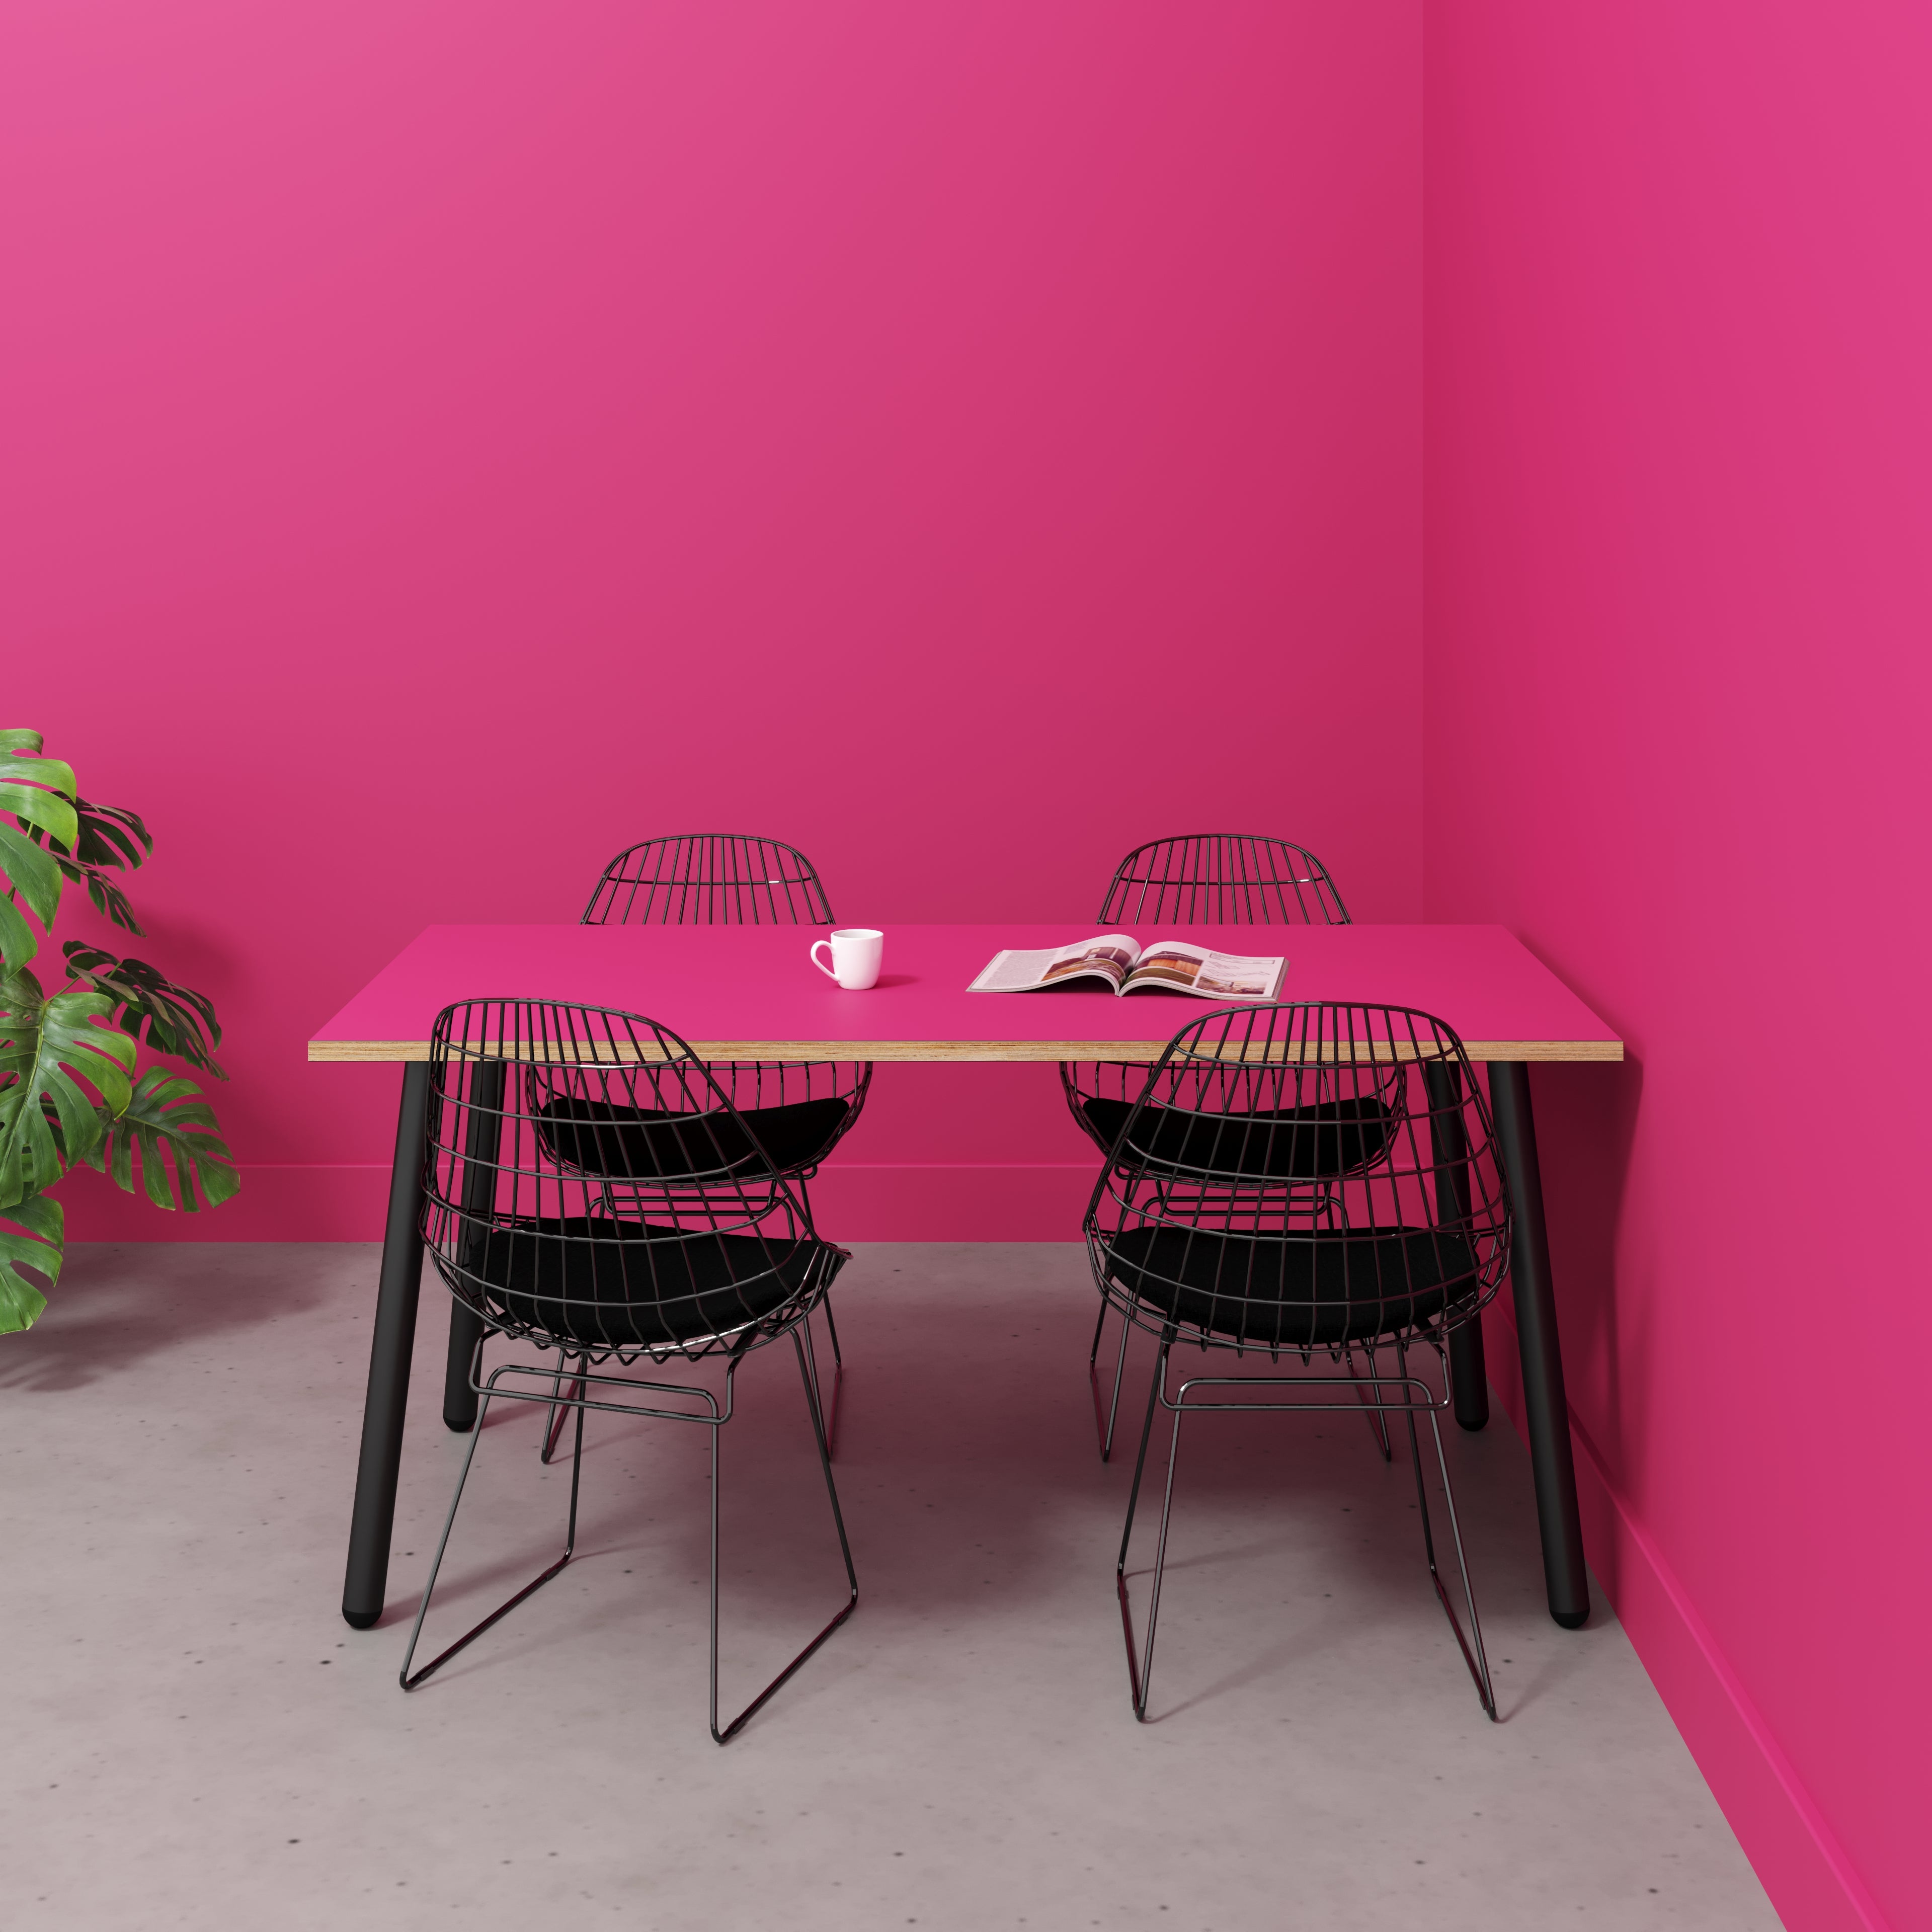 Table with Black Round Single Pin Legs - Formica Juicy Pink - 1600(w) x 800(d) x 735(h)